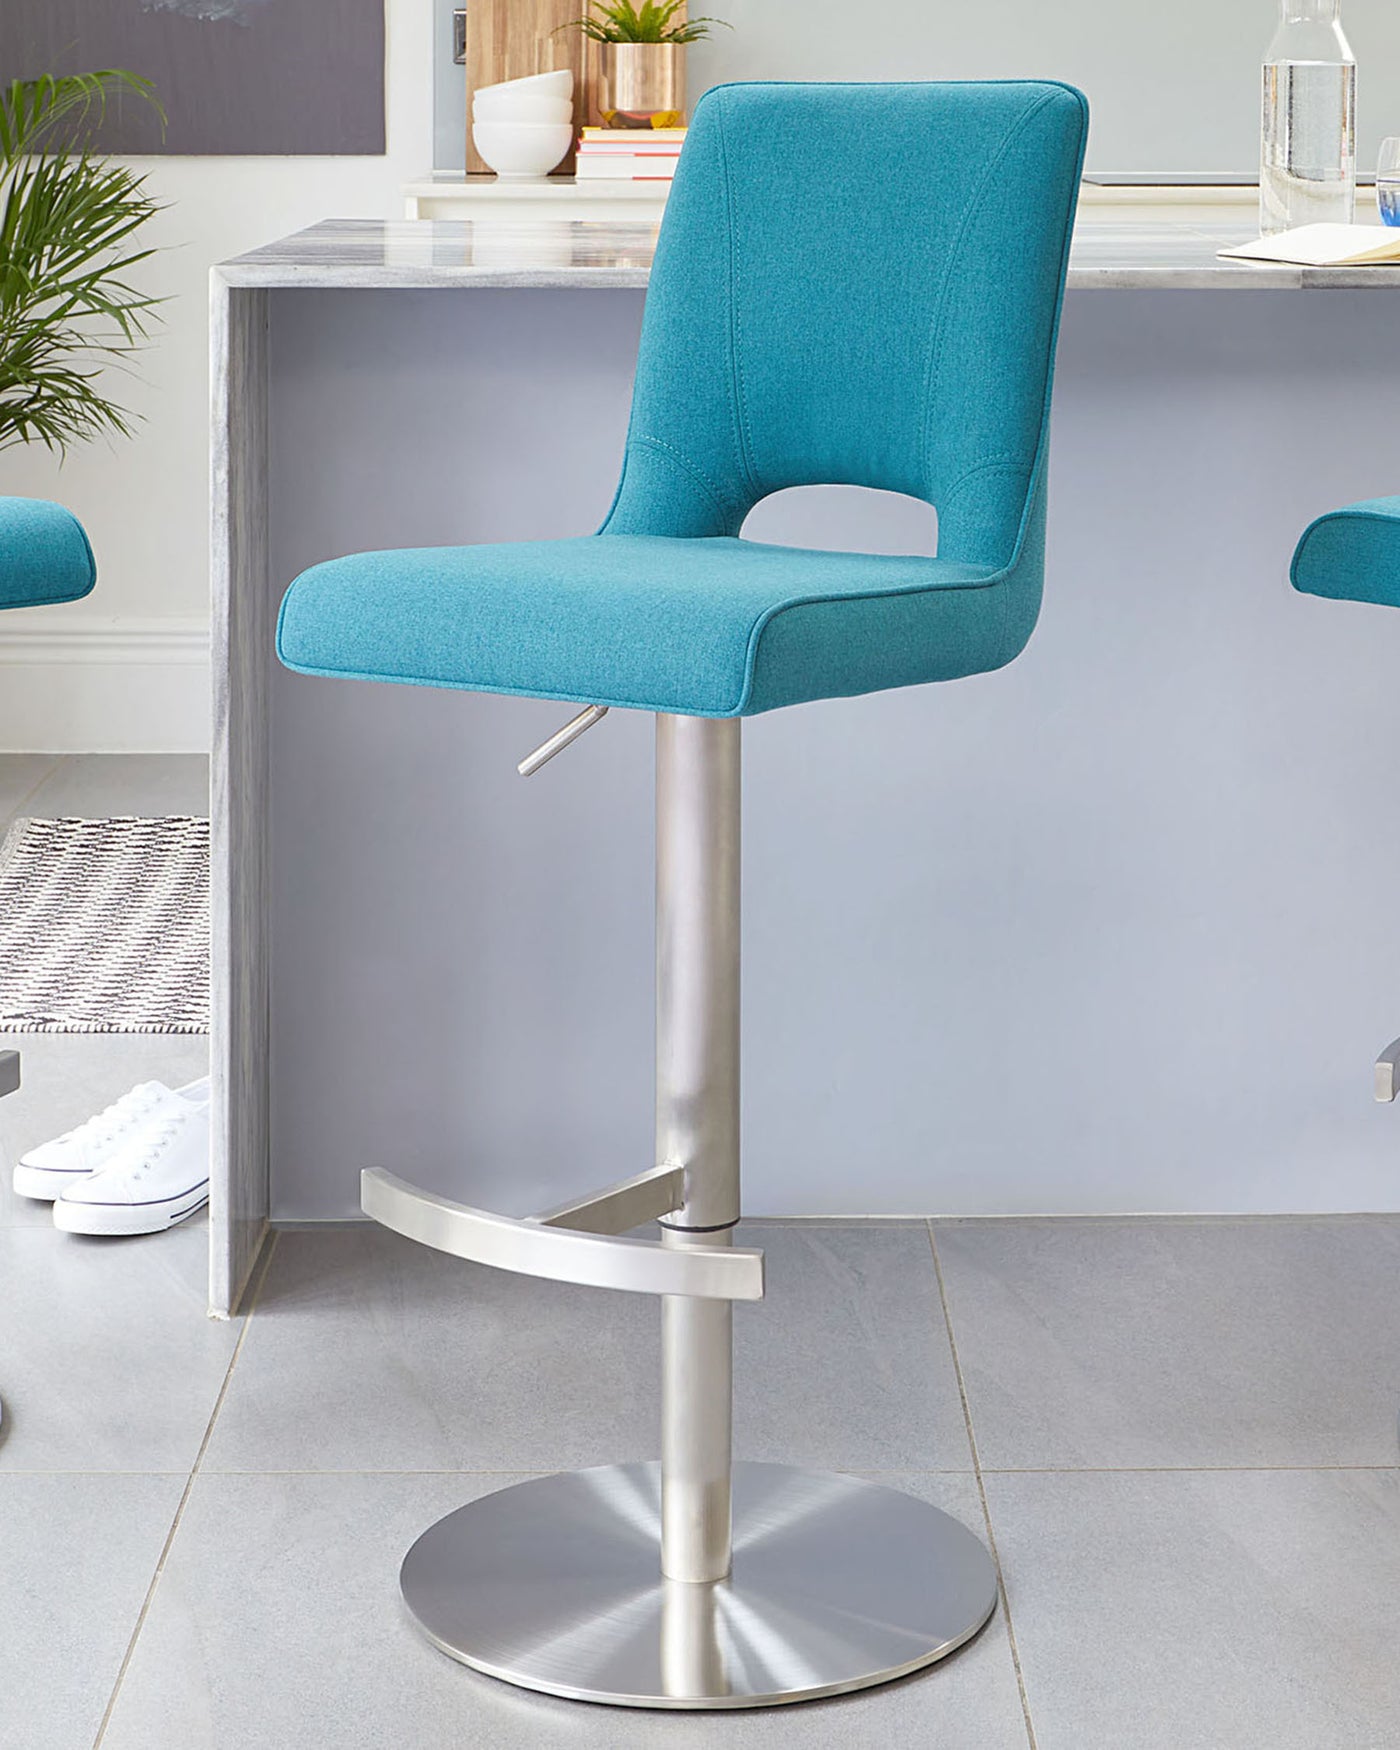 Modern adjustable-height bar stool with a turquoise blue fabric upholstery, featuring an ergonomically curved seat and backrest. The stool has a sleek chrome pedestal base with a built-in footrest and a round flat base for stability.